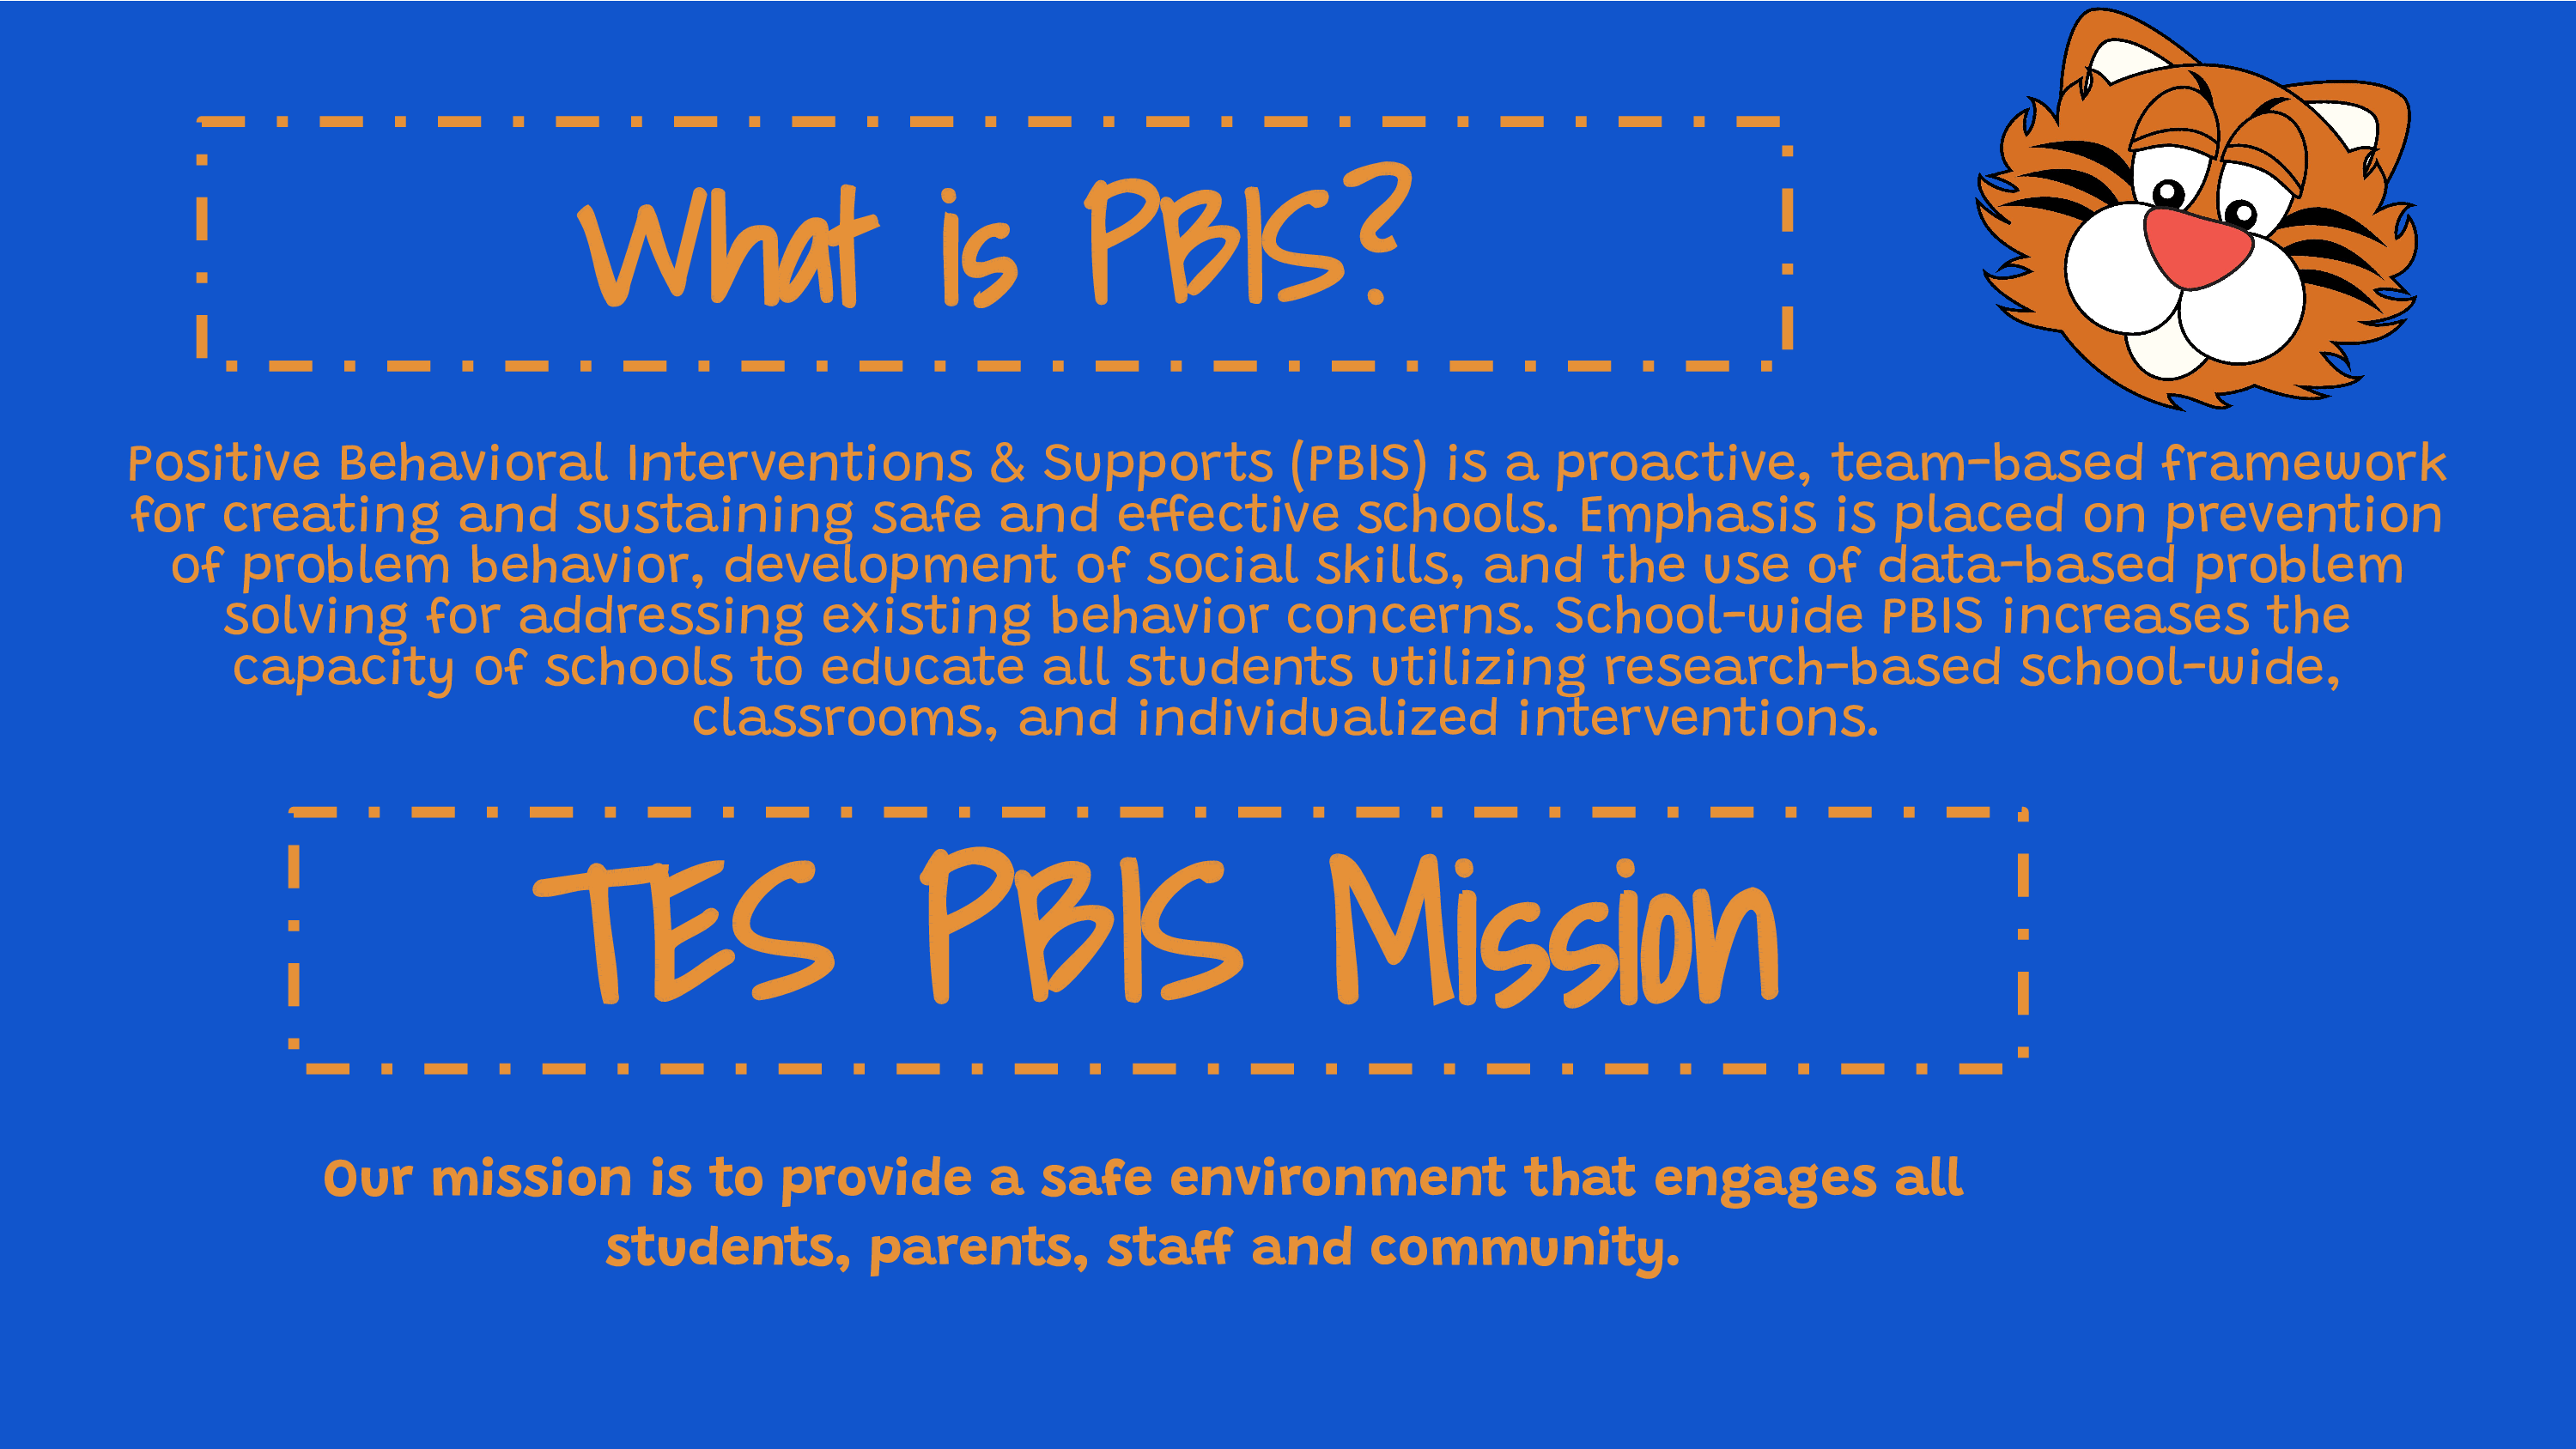 PBIS meaning